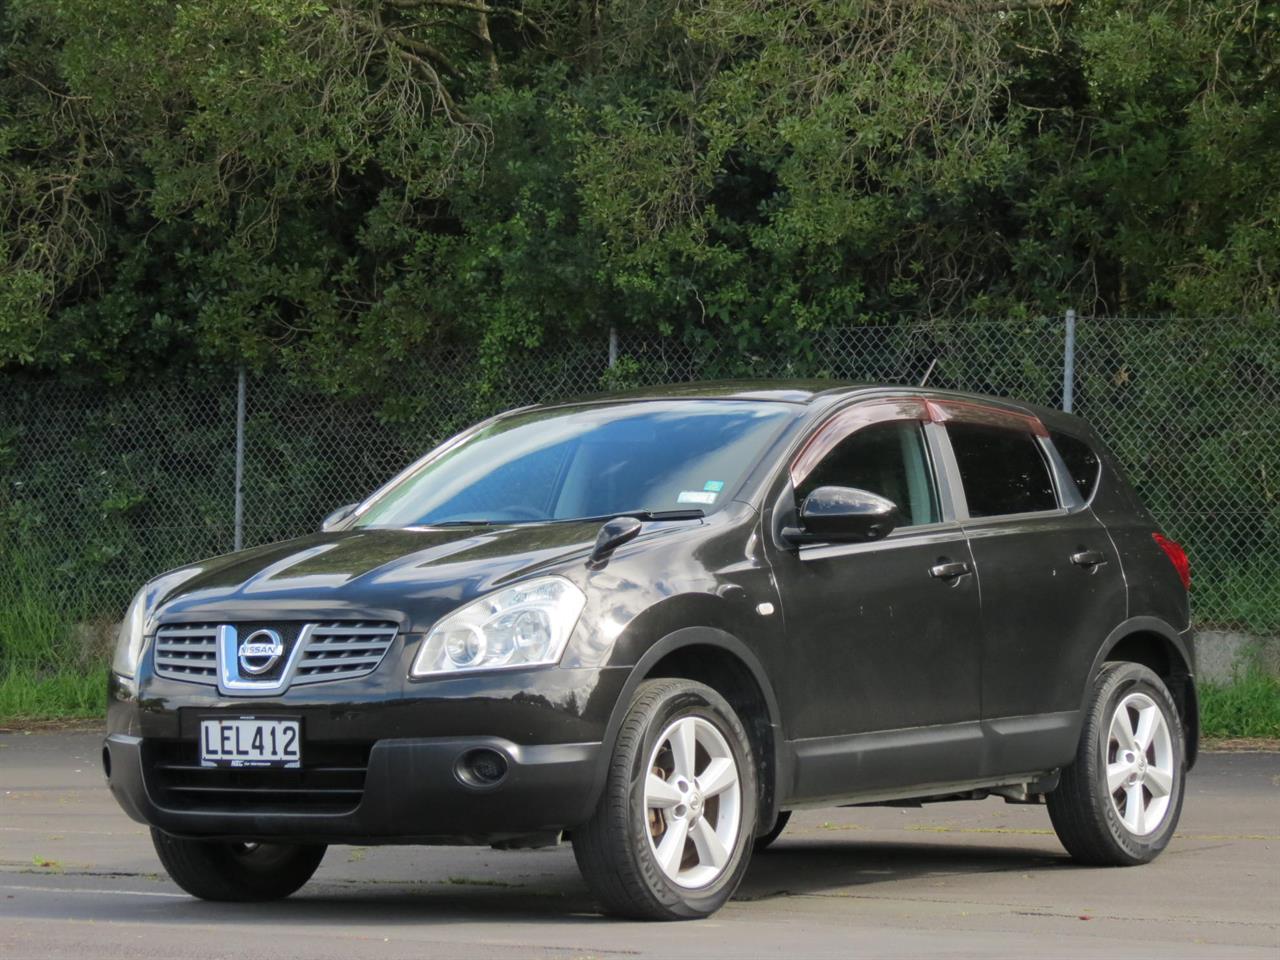 2008 Nissan DUALIS only $34 weekly